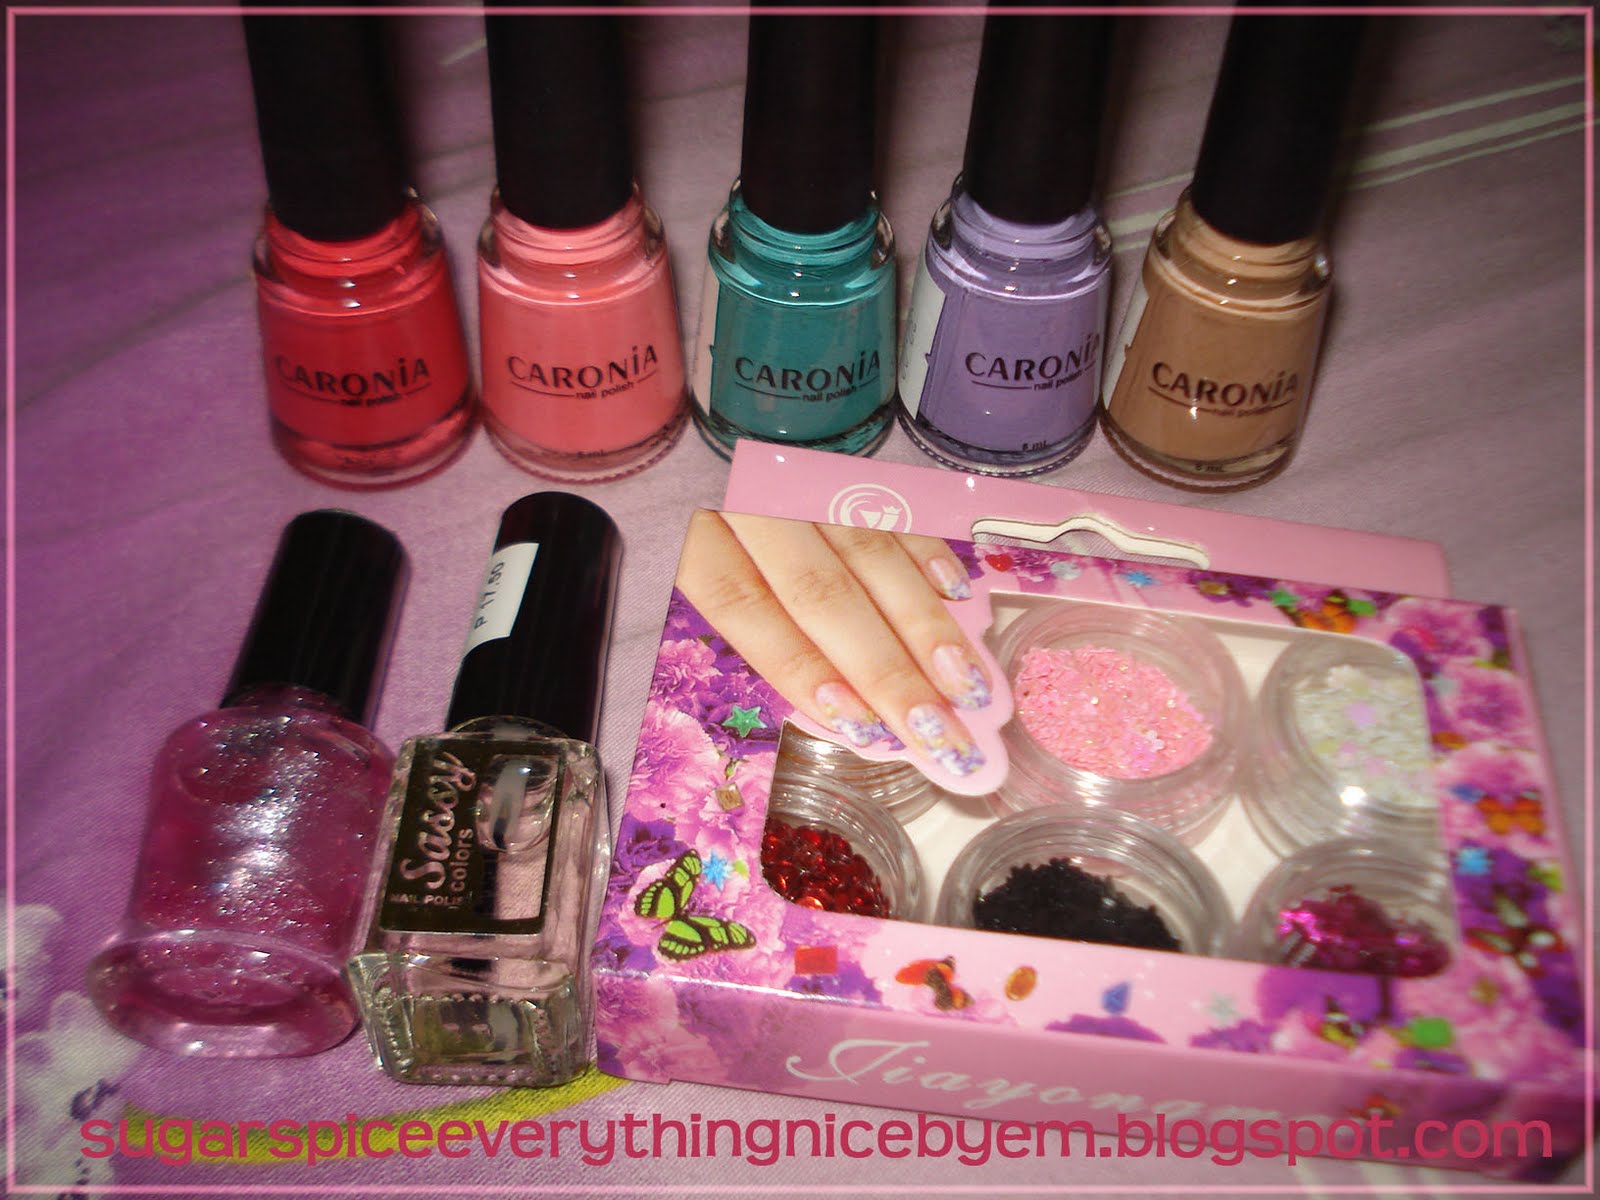 2. Lore Nail Art Products - wide 4